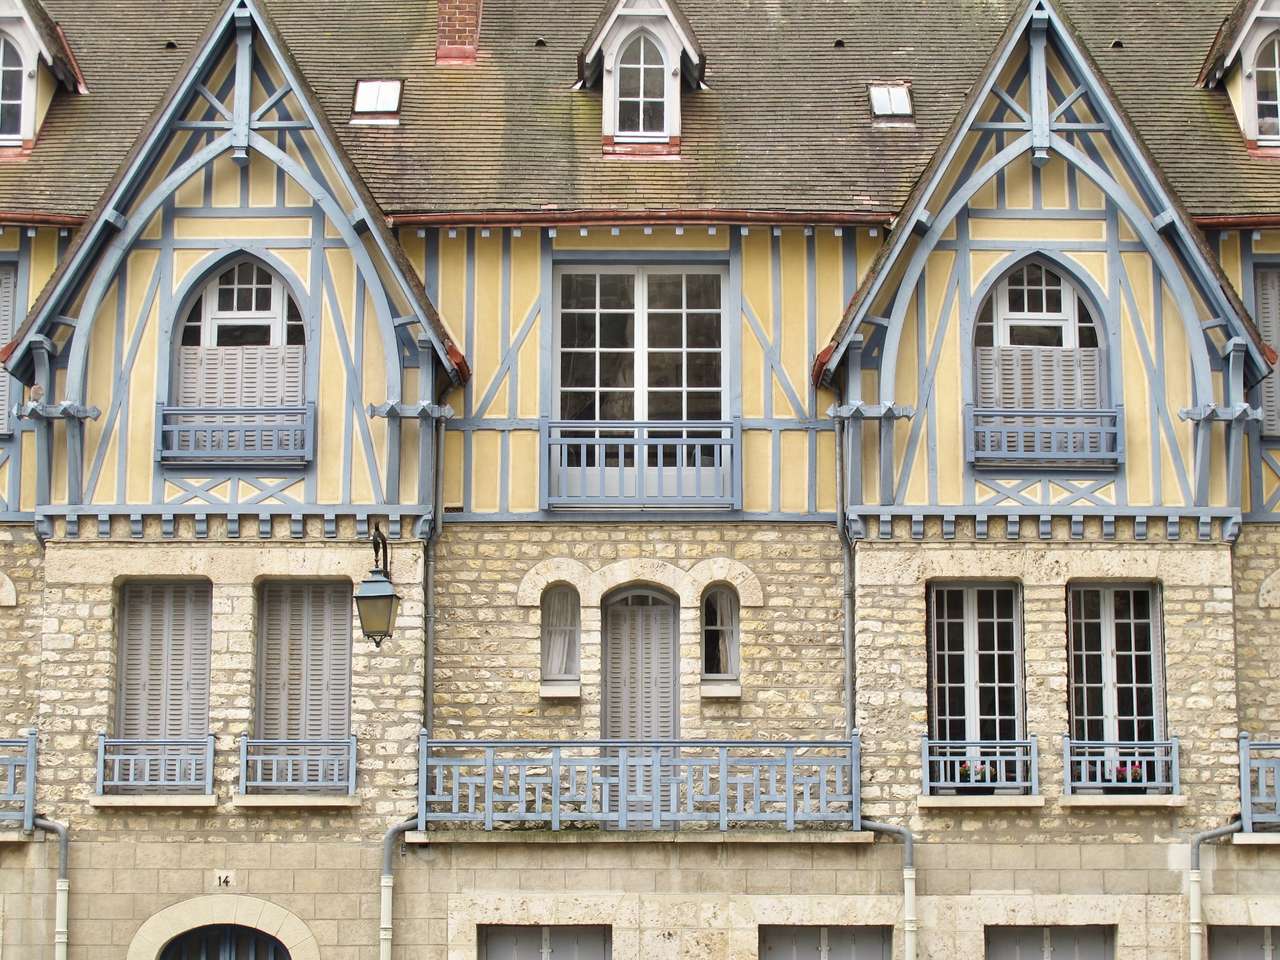 Mooi huis in Chartres online puzzel